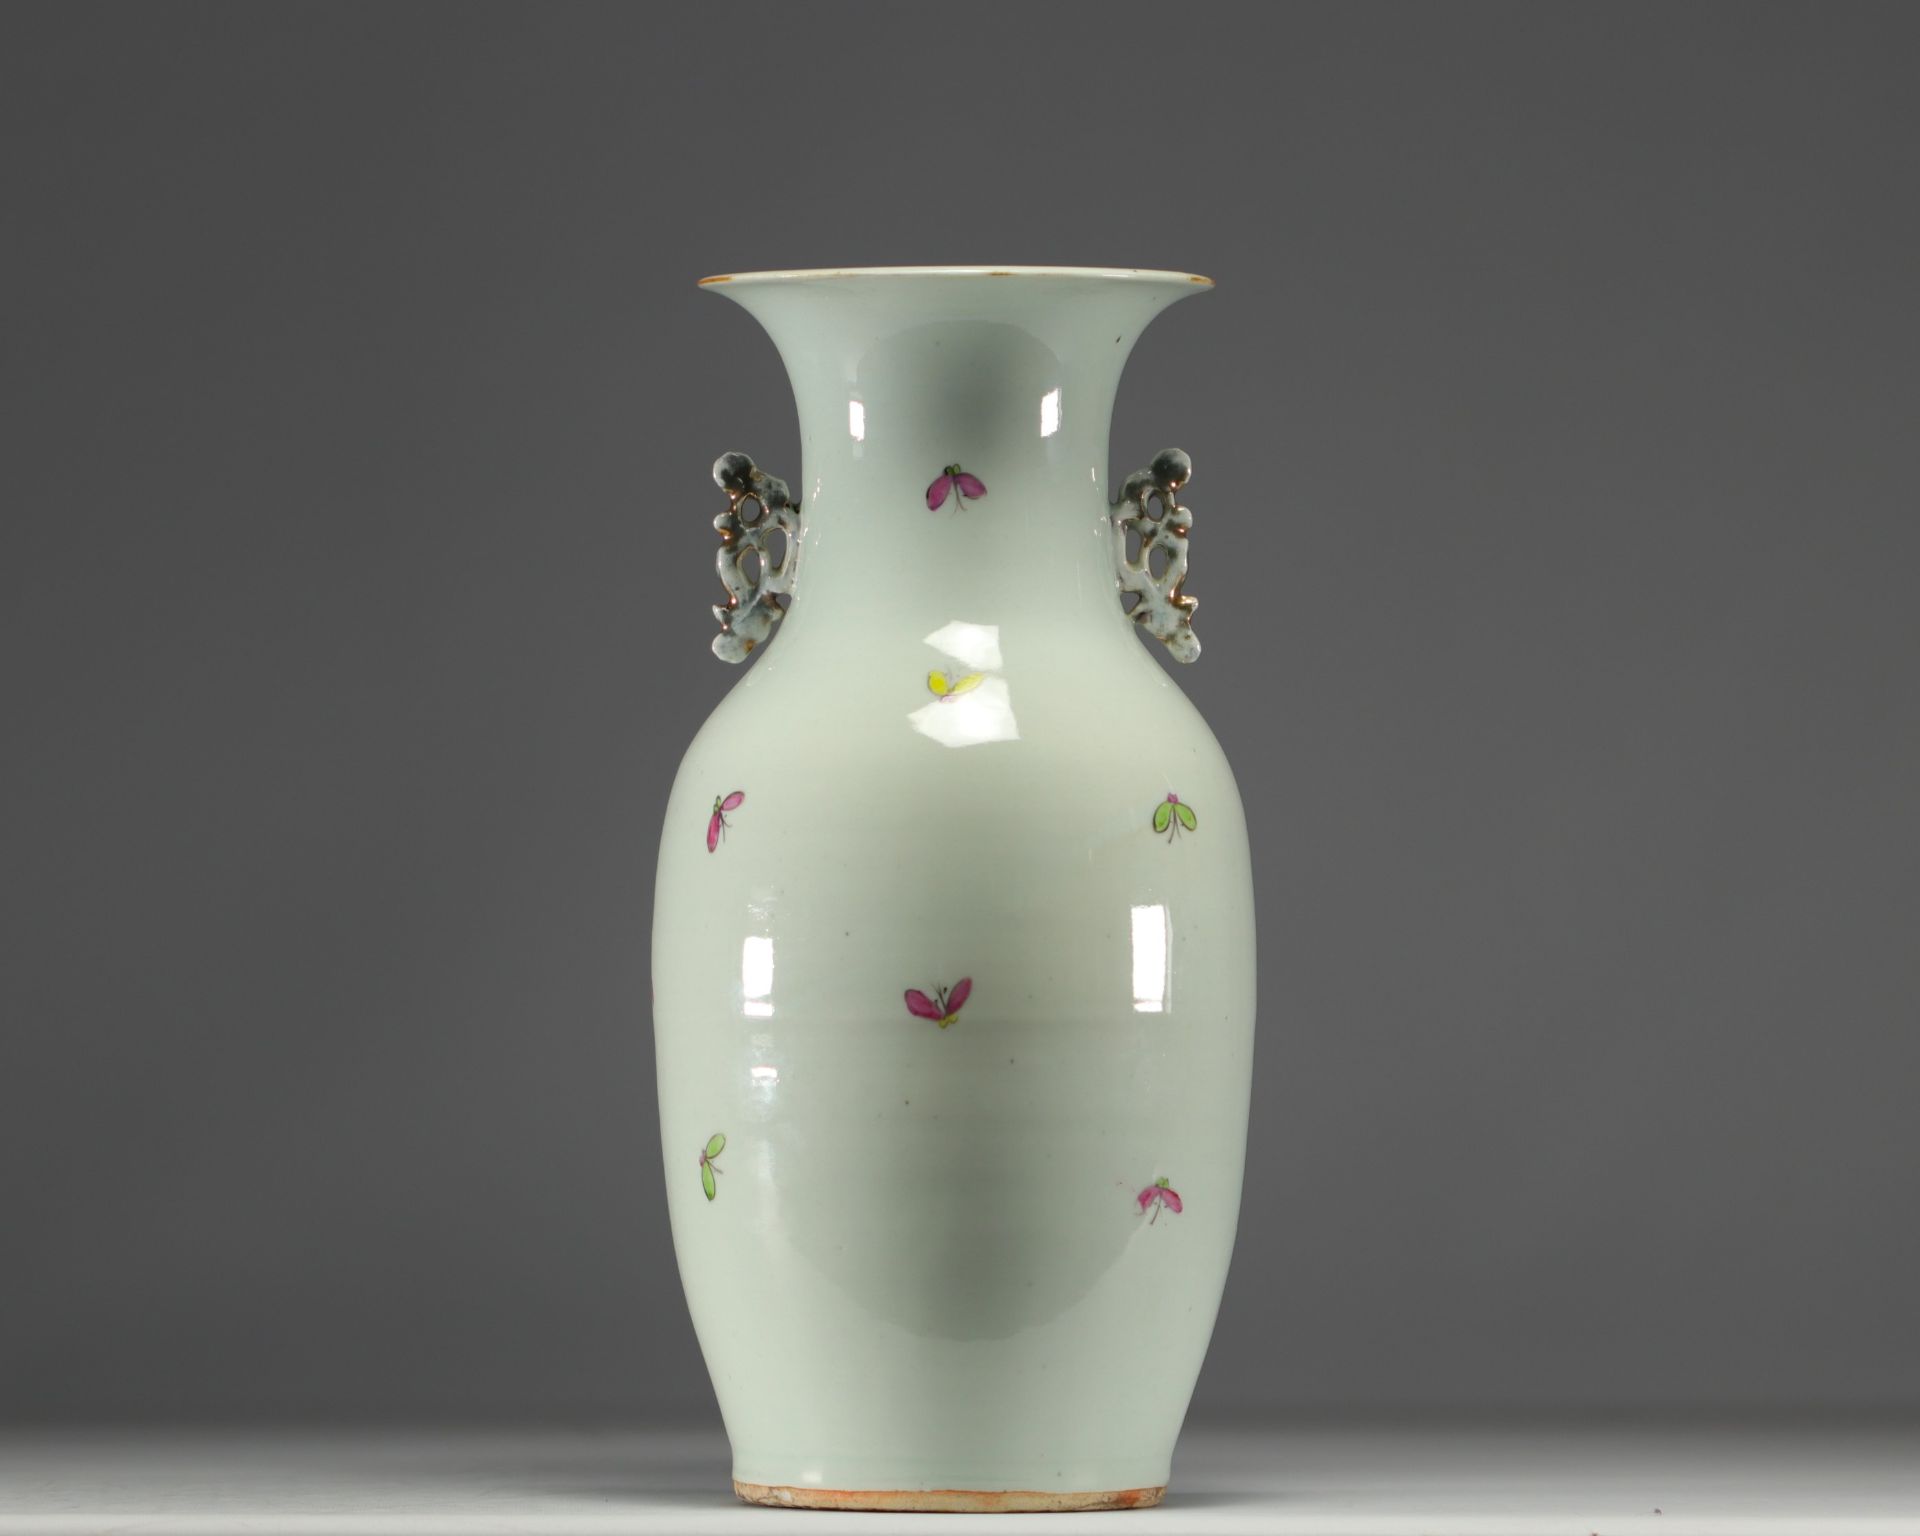 China - Porcelain vase decorated with birds and floral motifs - 20th century - Image 2 of 3